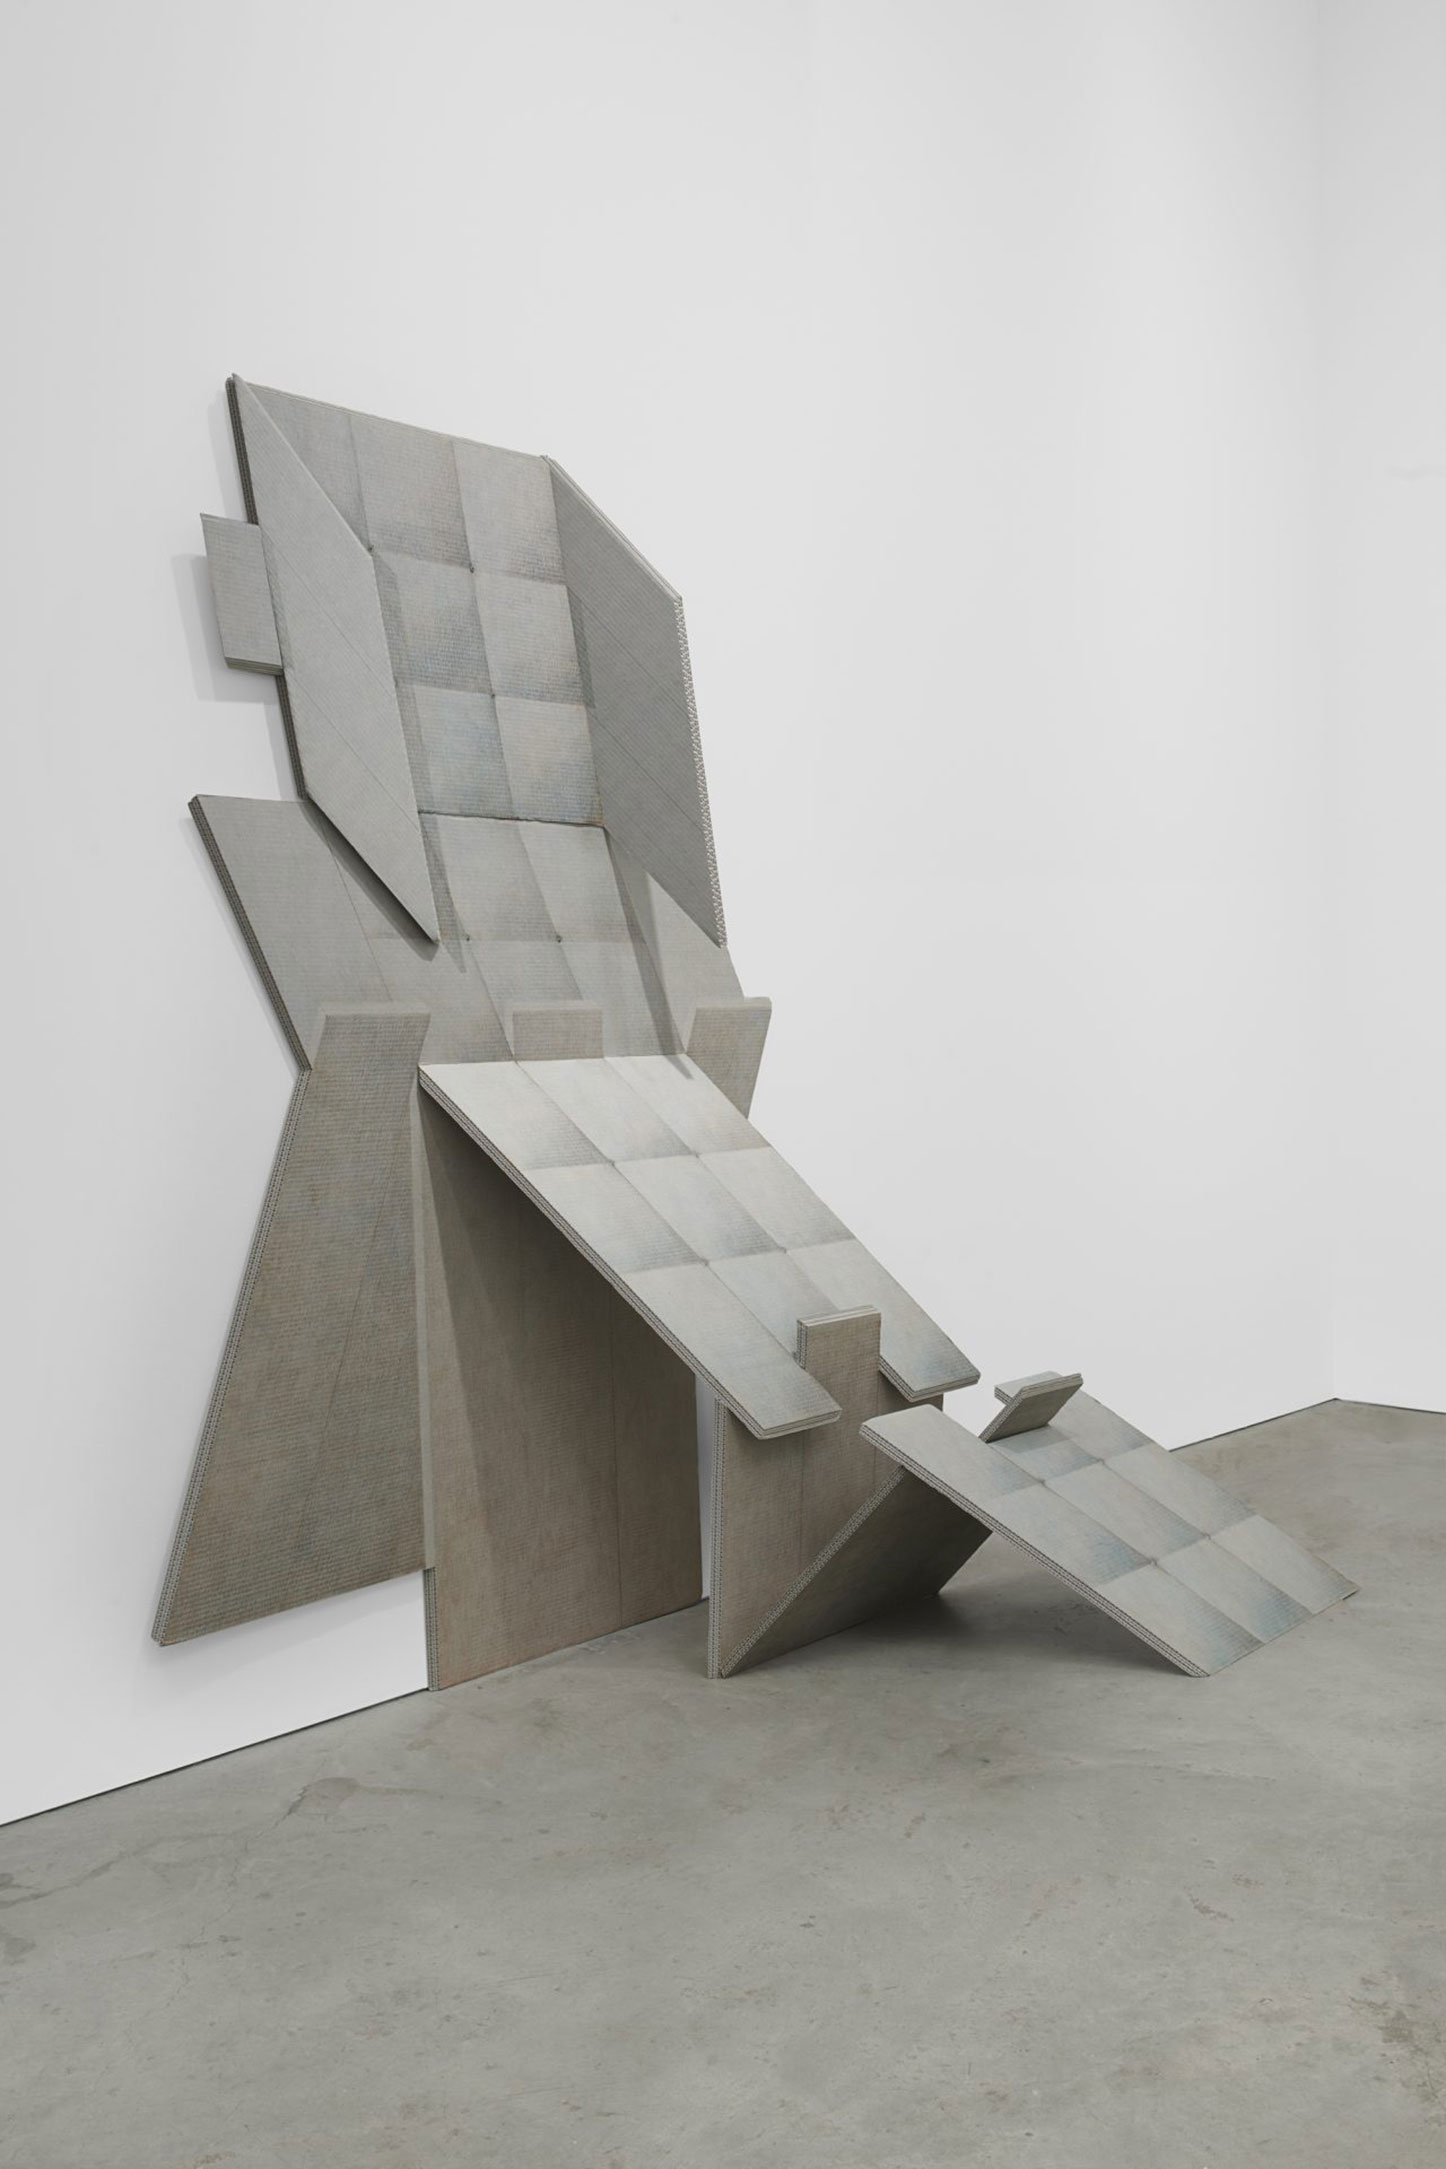 Diane Simpson, Chaise (1979). Photo: Phoebe d’Heurle. Courtesy of James Cohan Gallery.